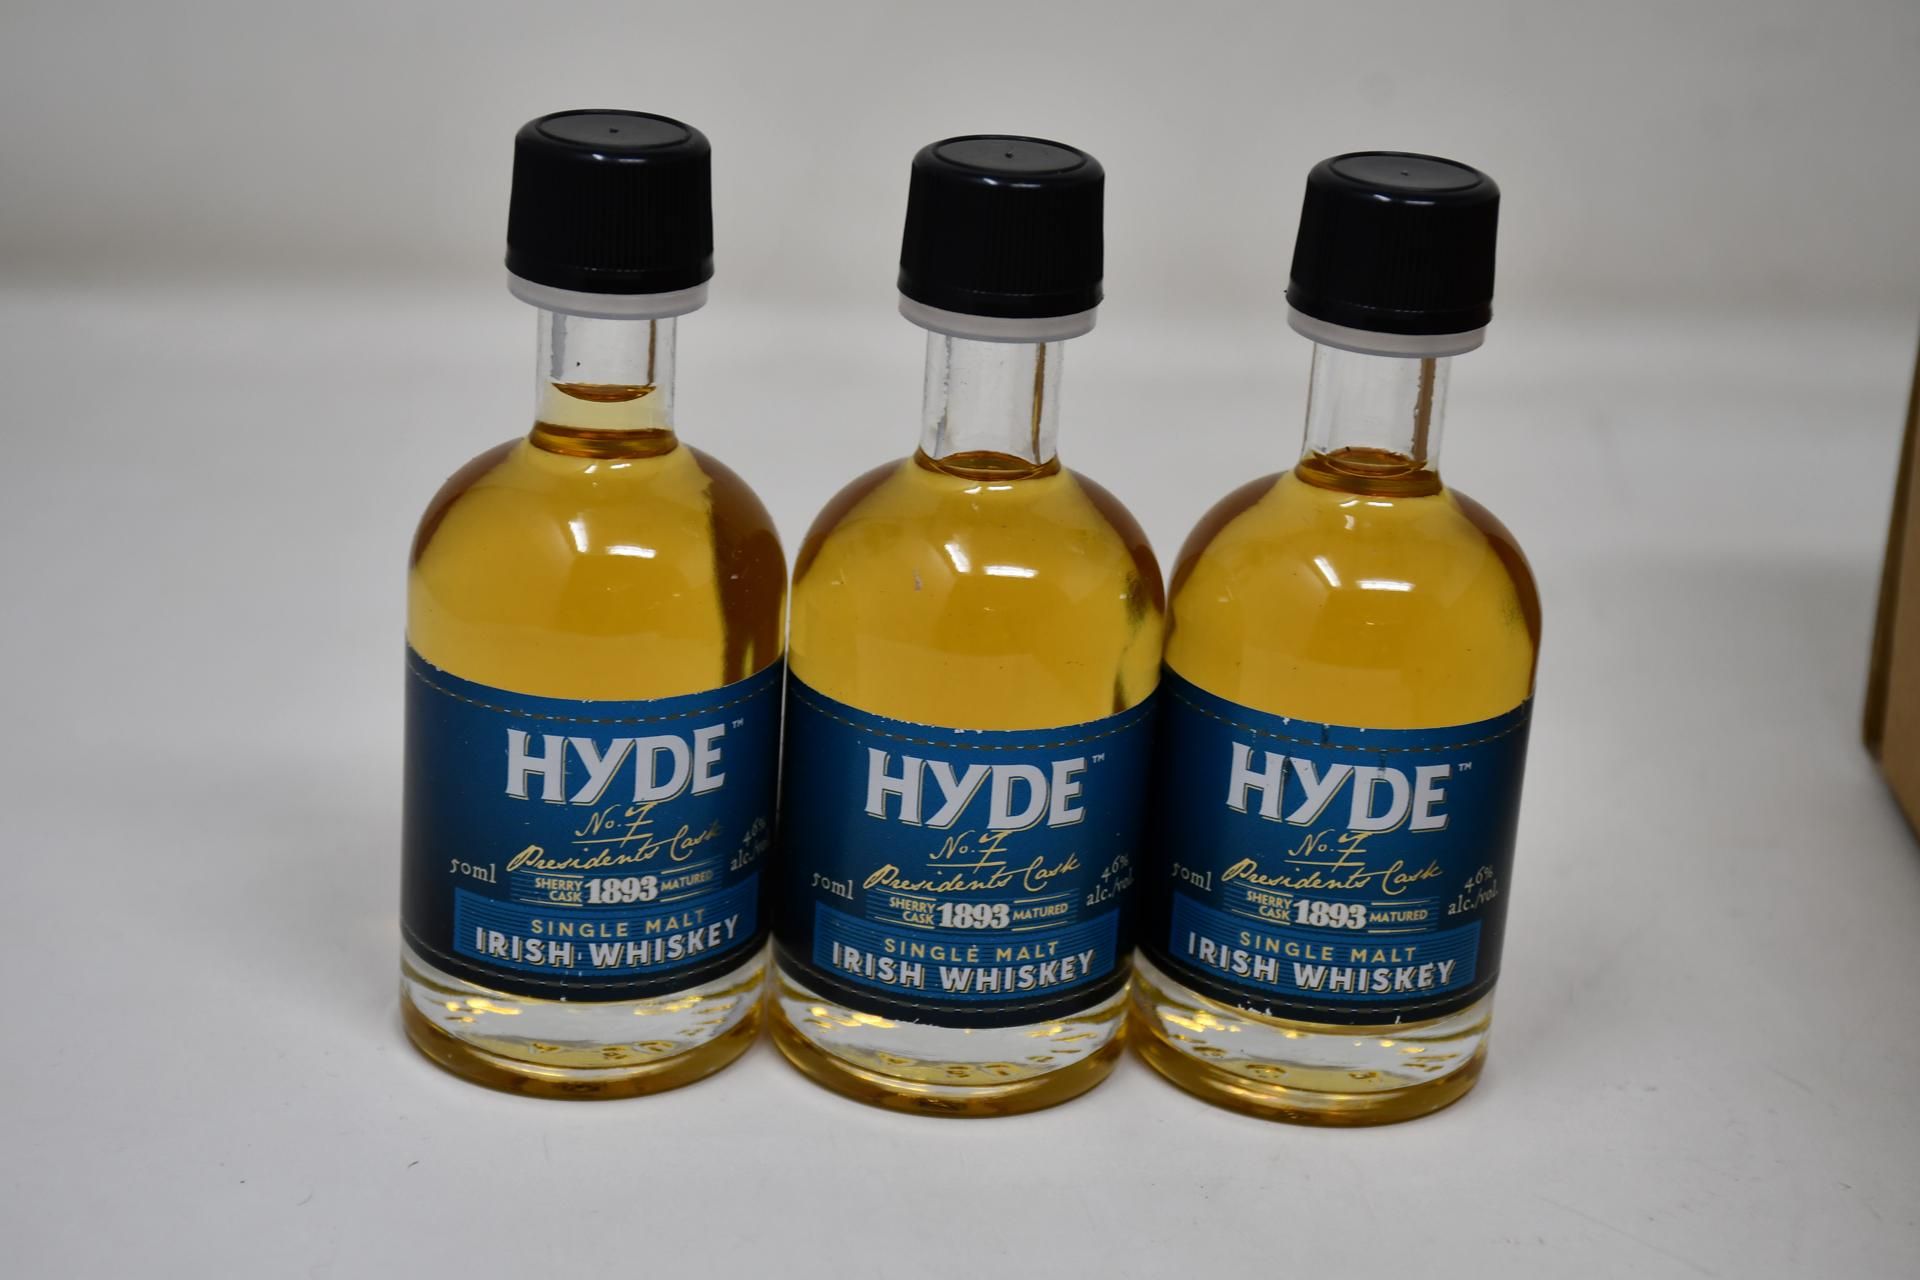 A box of Hyde Single Malt Irish Whiskey Miniatures (24x50ml) (Over 18s only).